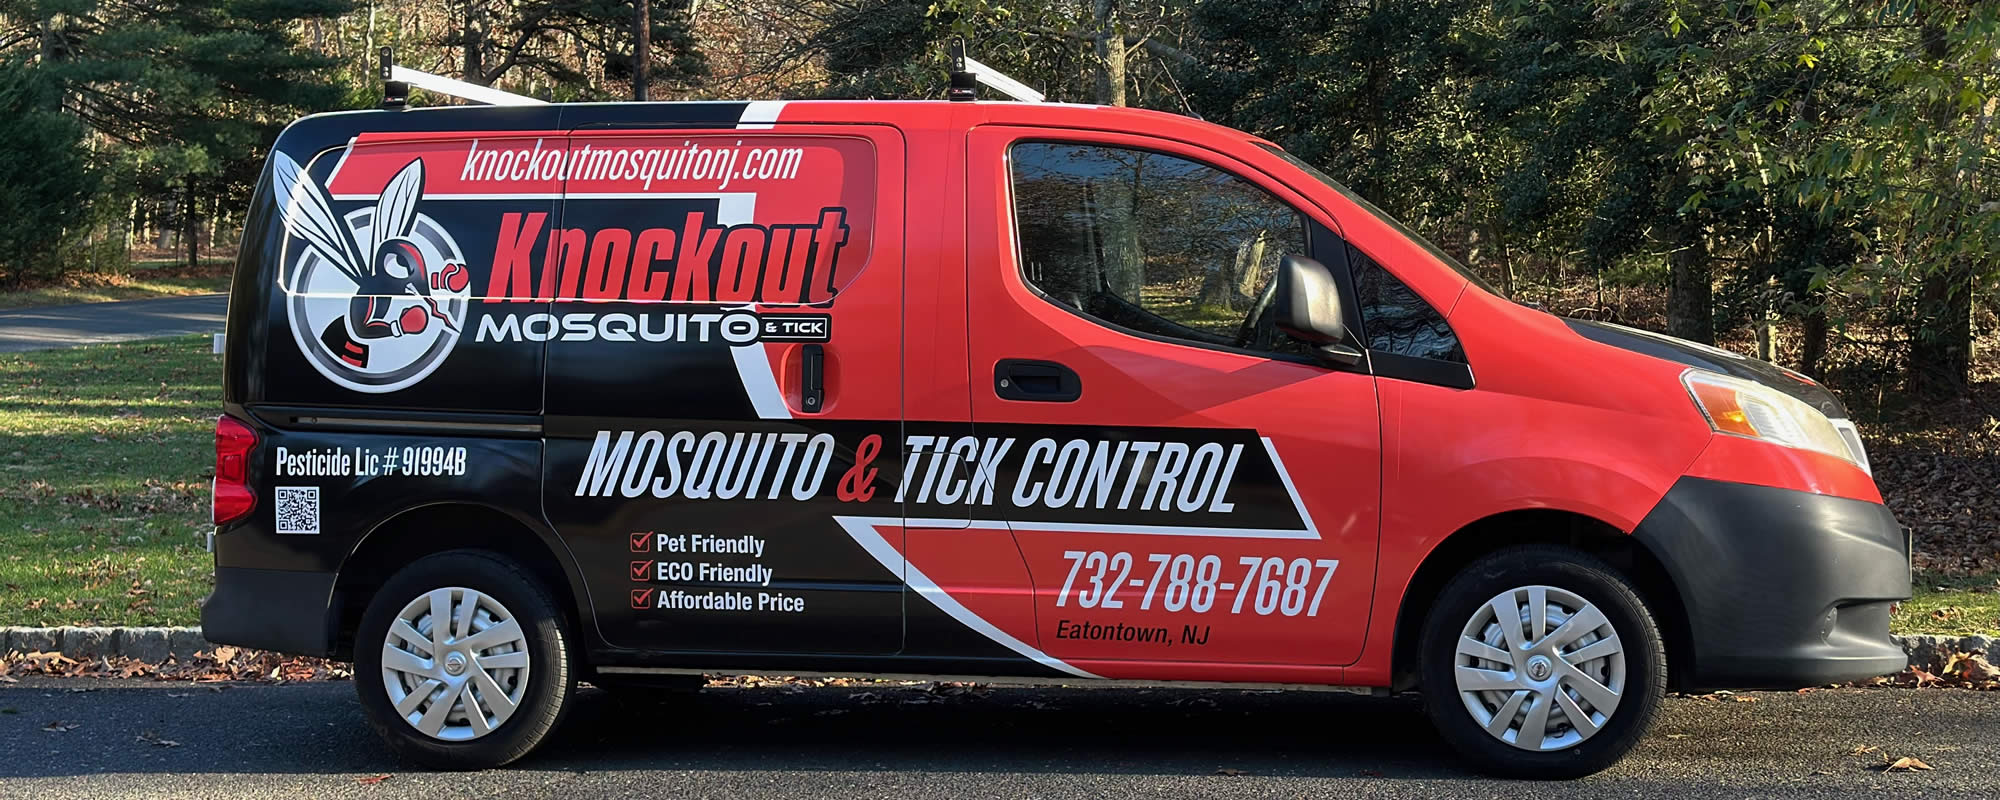 Pest control service in Eatontown, New Jersey